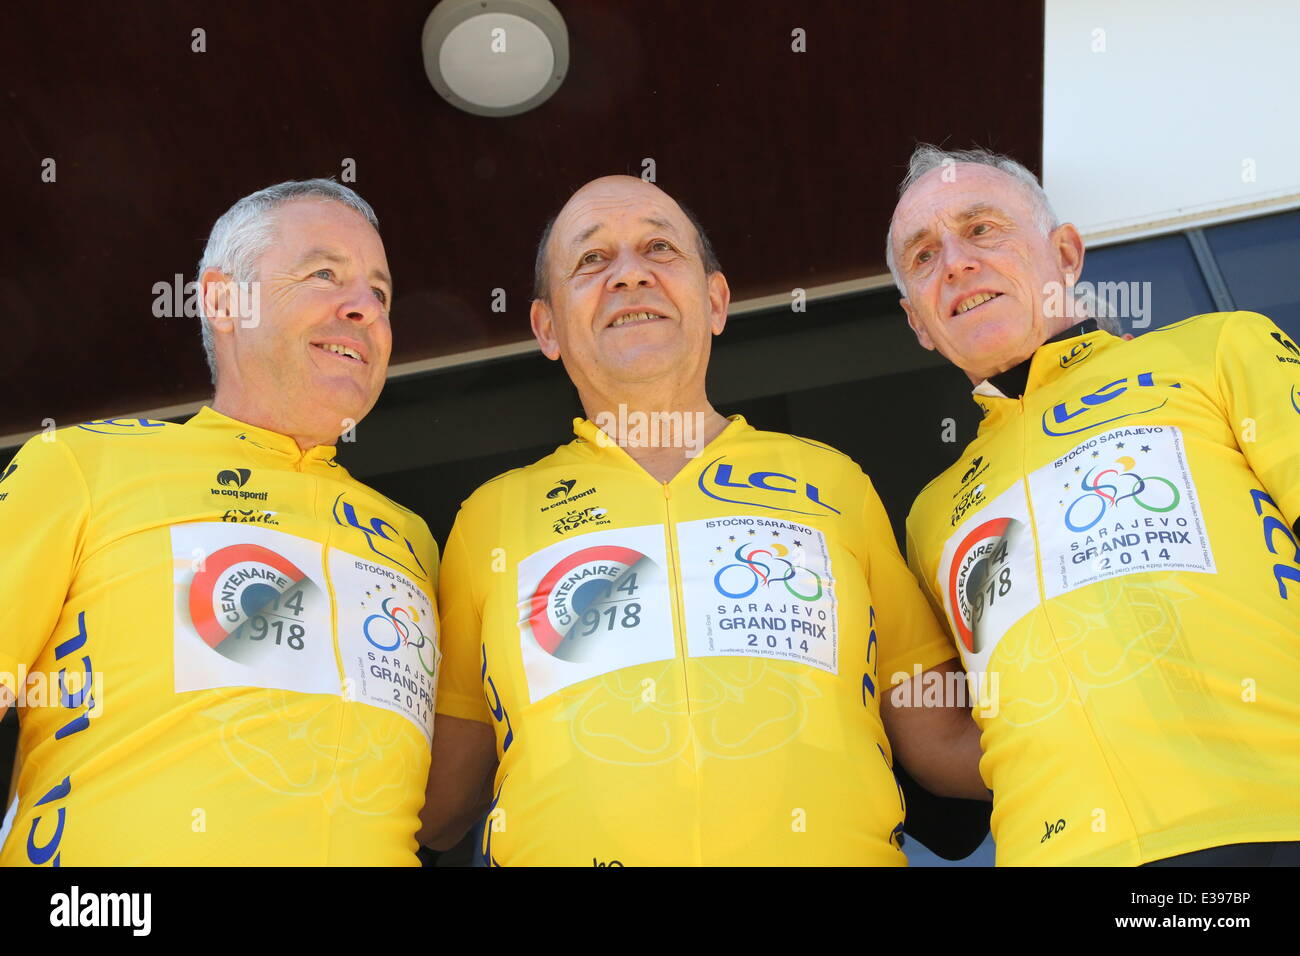 Sarajevo, Bosnia-Herzegovina. 22nd June, 2014. Former champions of Tour de France pose before the opening of the cycle event in Lukavica near Sarajevo, Bosnia-Herzegovina, on June 22, 2014. About 140 professional cyclists participate the Sarajevo Grand Prix (SGP) with a tour of 140 kilometers. SGP was supported by Tour de France. Credit:  Haris Memija/Xinhua/Alamy Live News Stock Photo